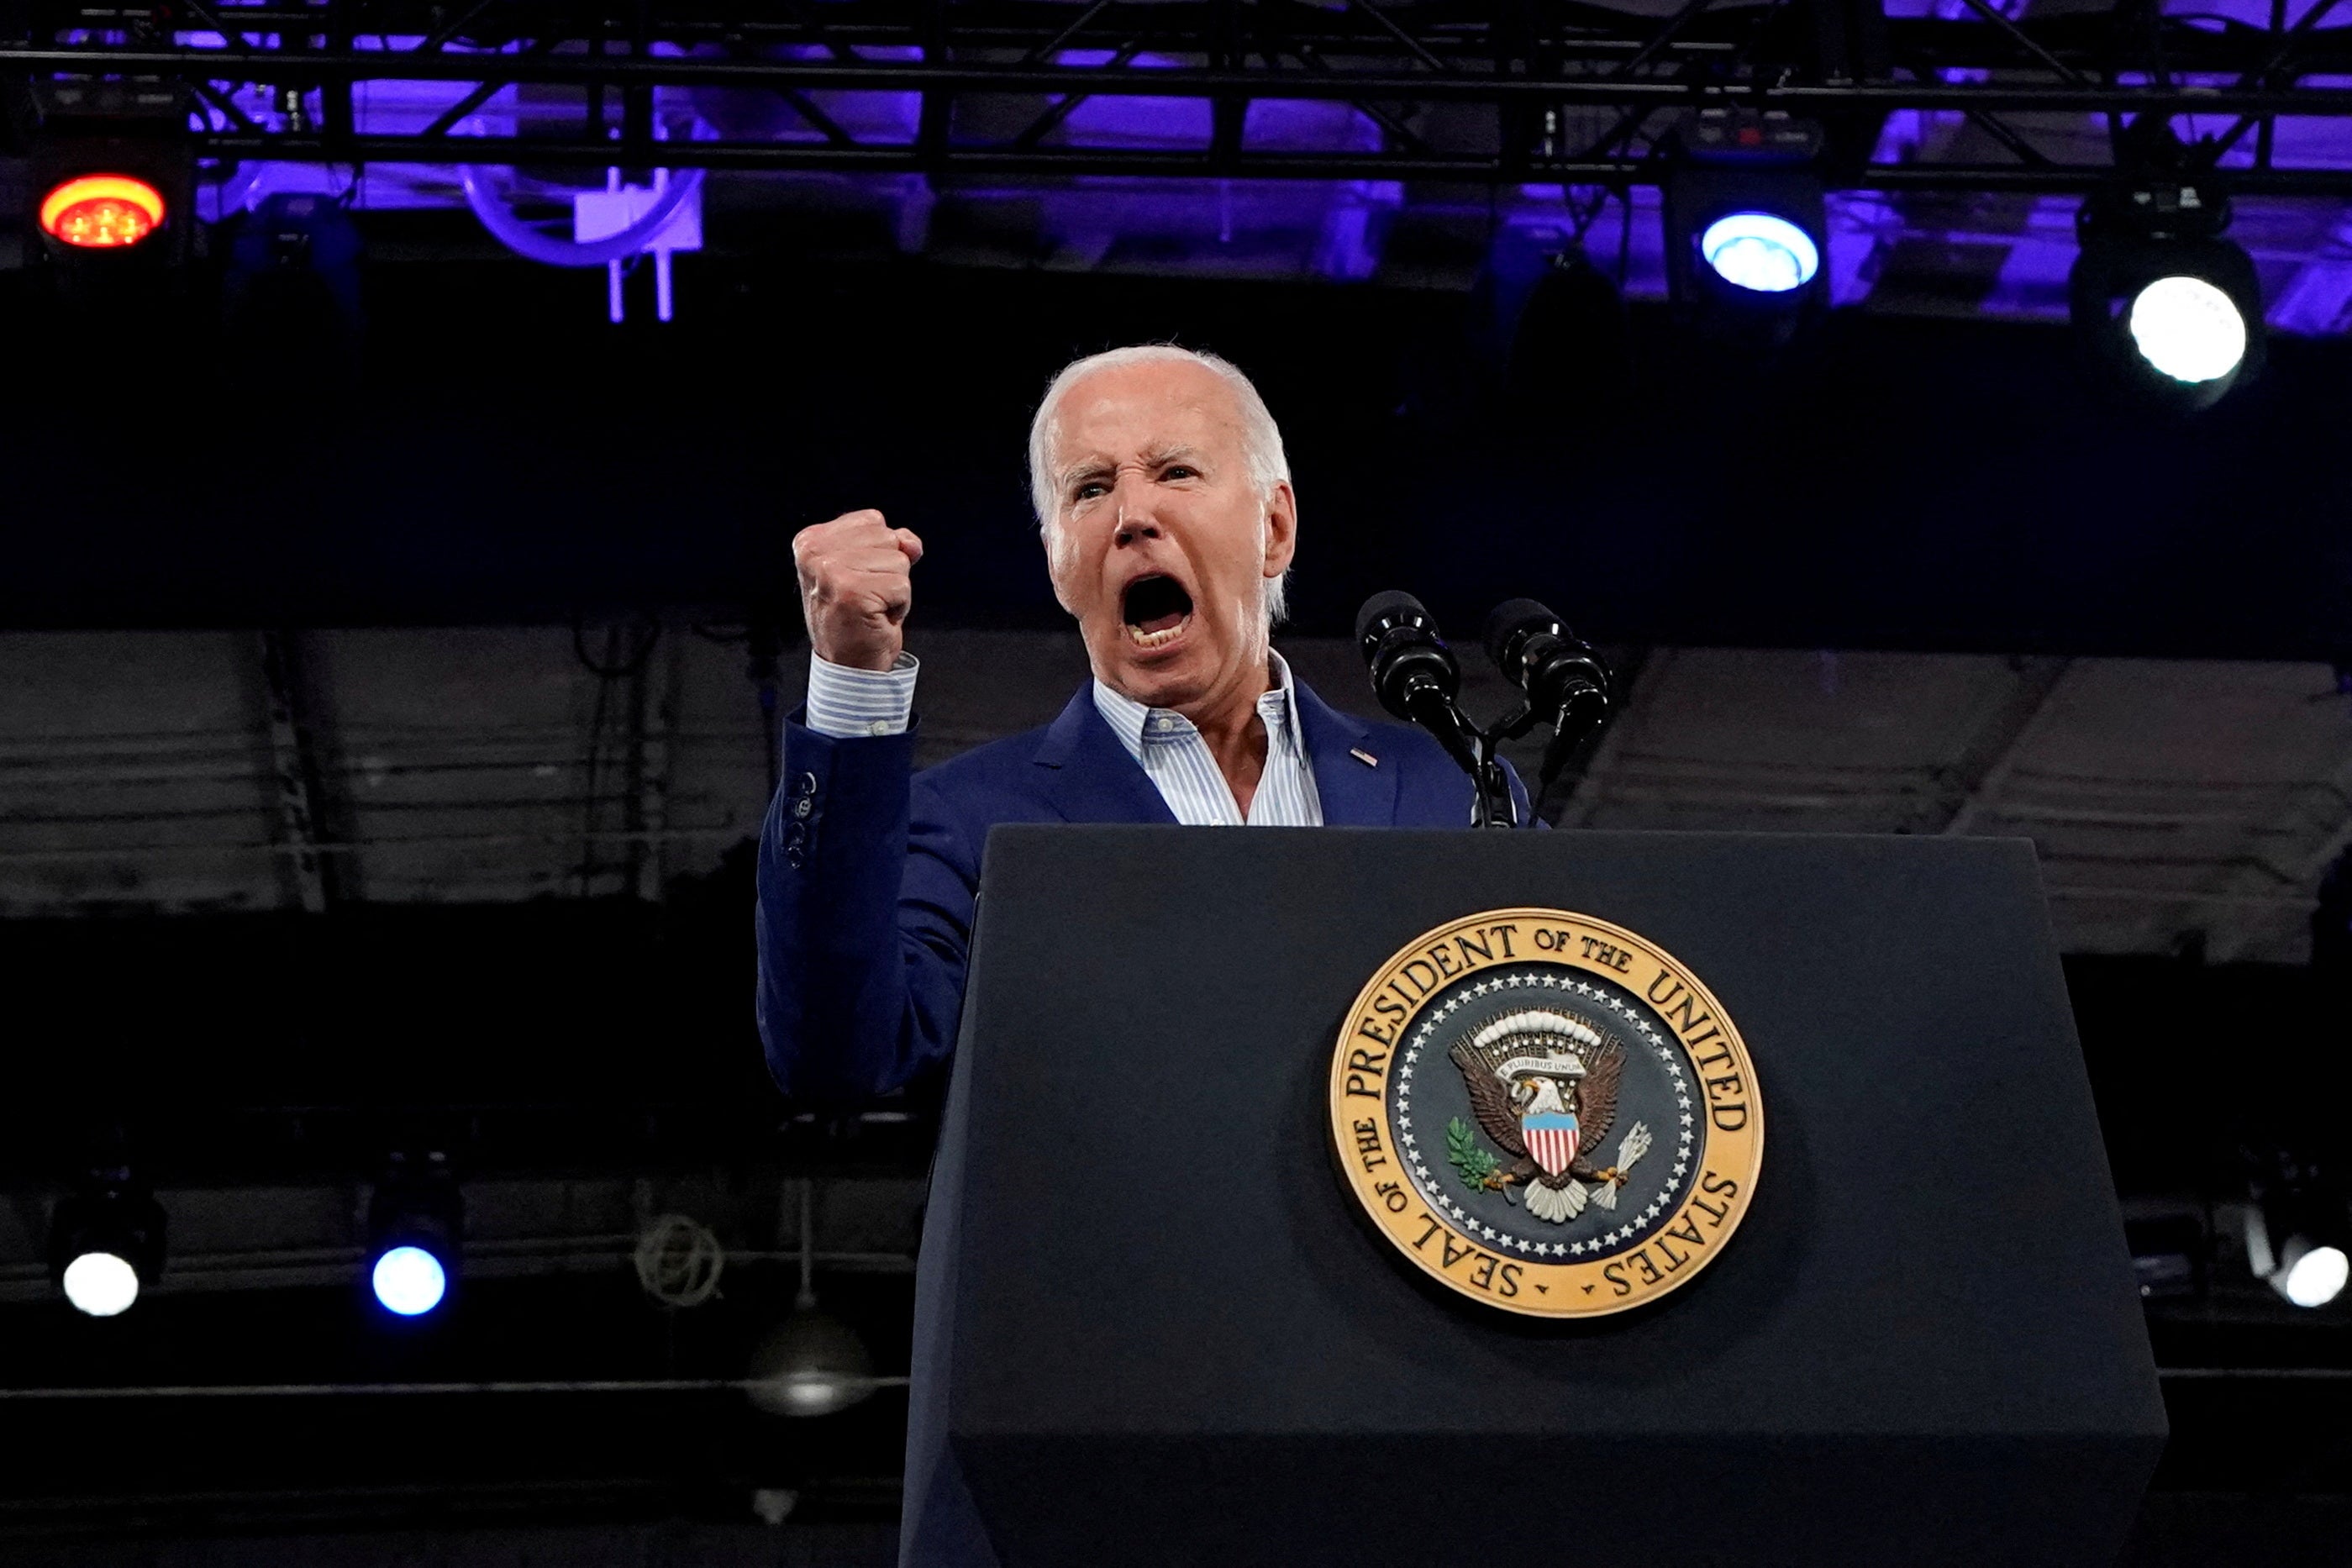 President Joe Biden addresses supporters at campaign rally in North Carolina on June 28, the day after his disastrous debate performance against Donald Trump